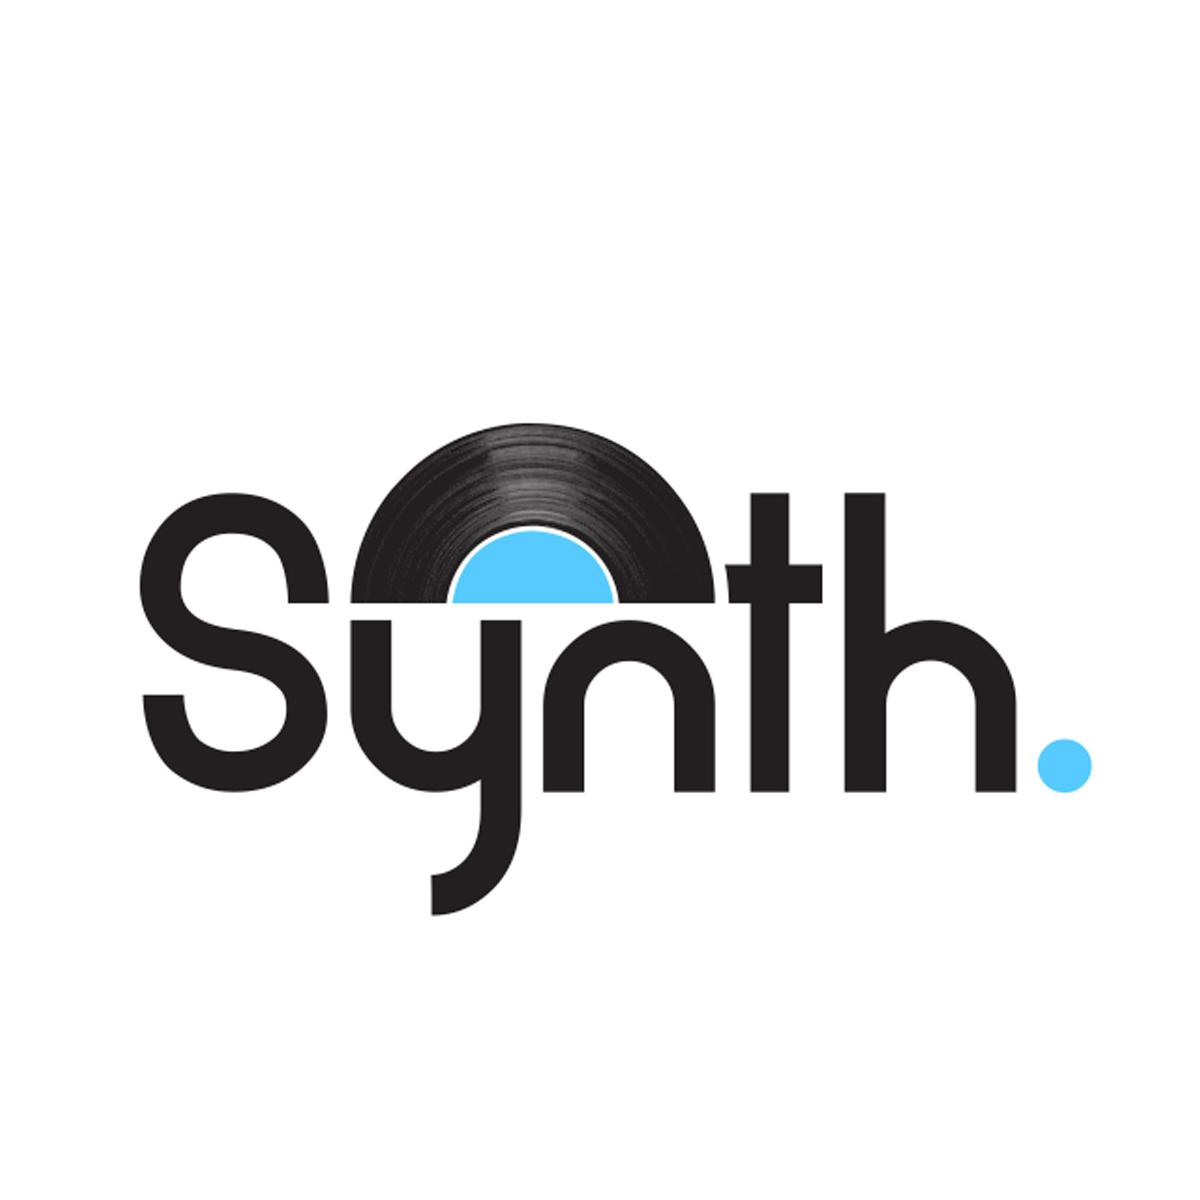 thedjsynth